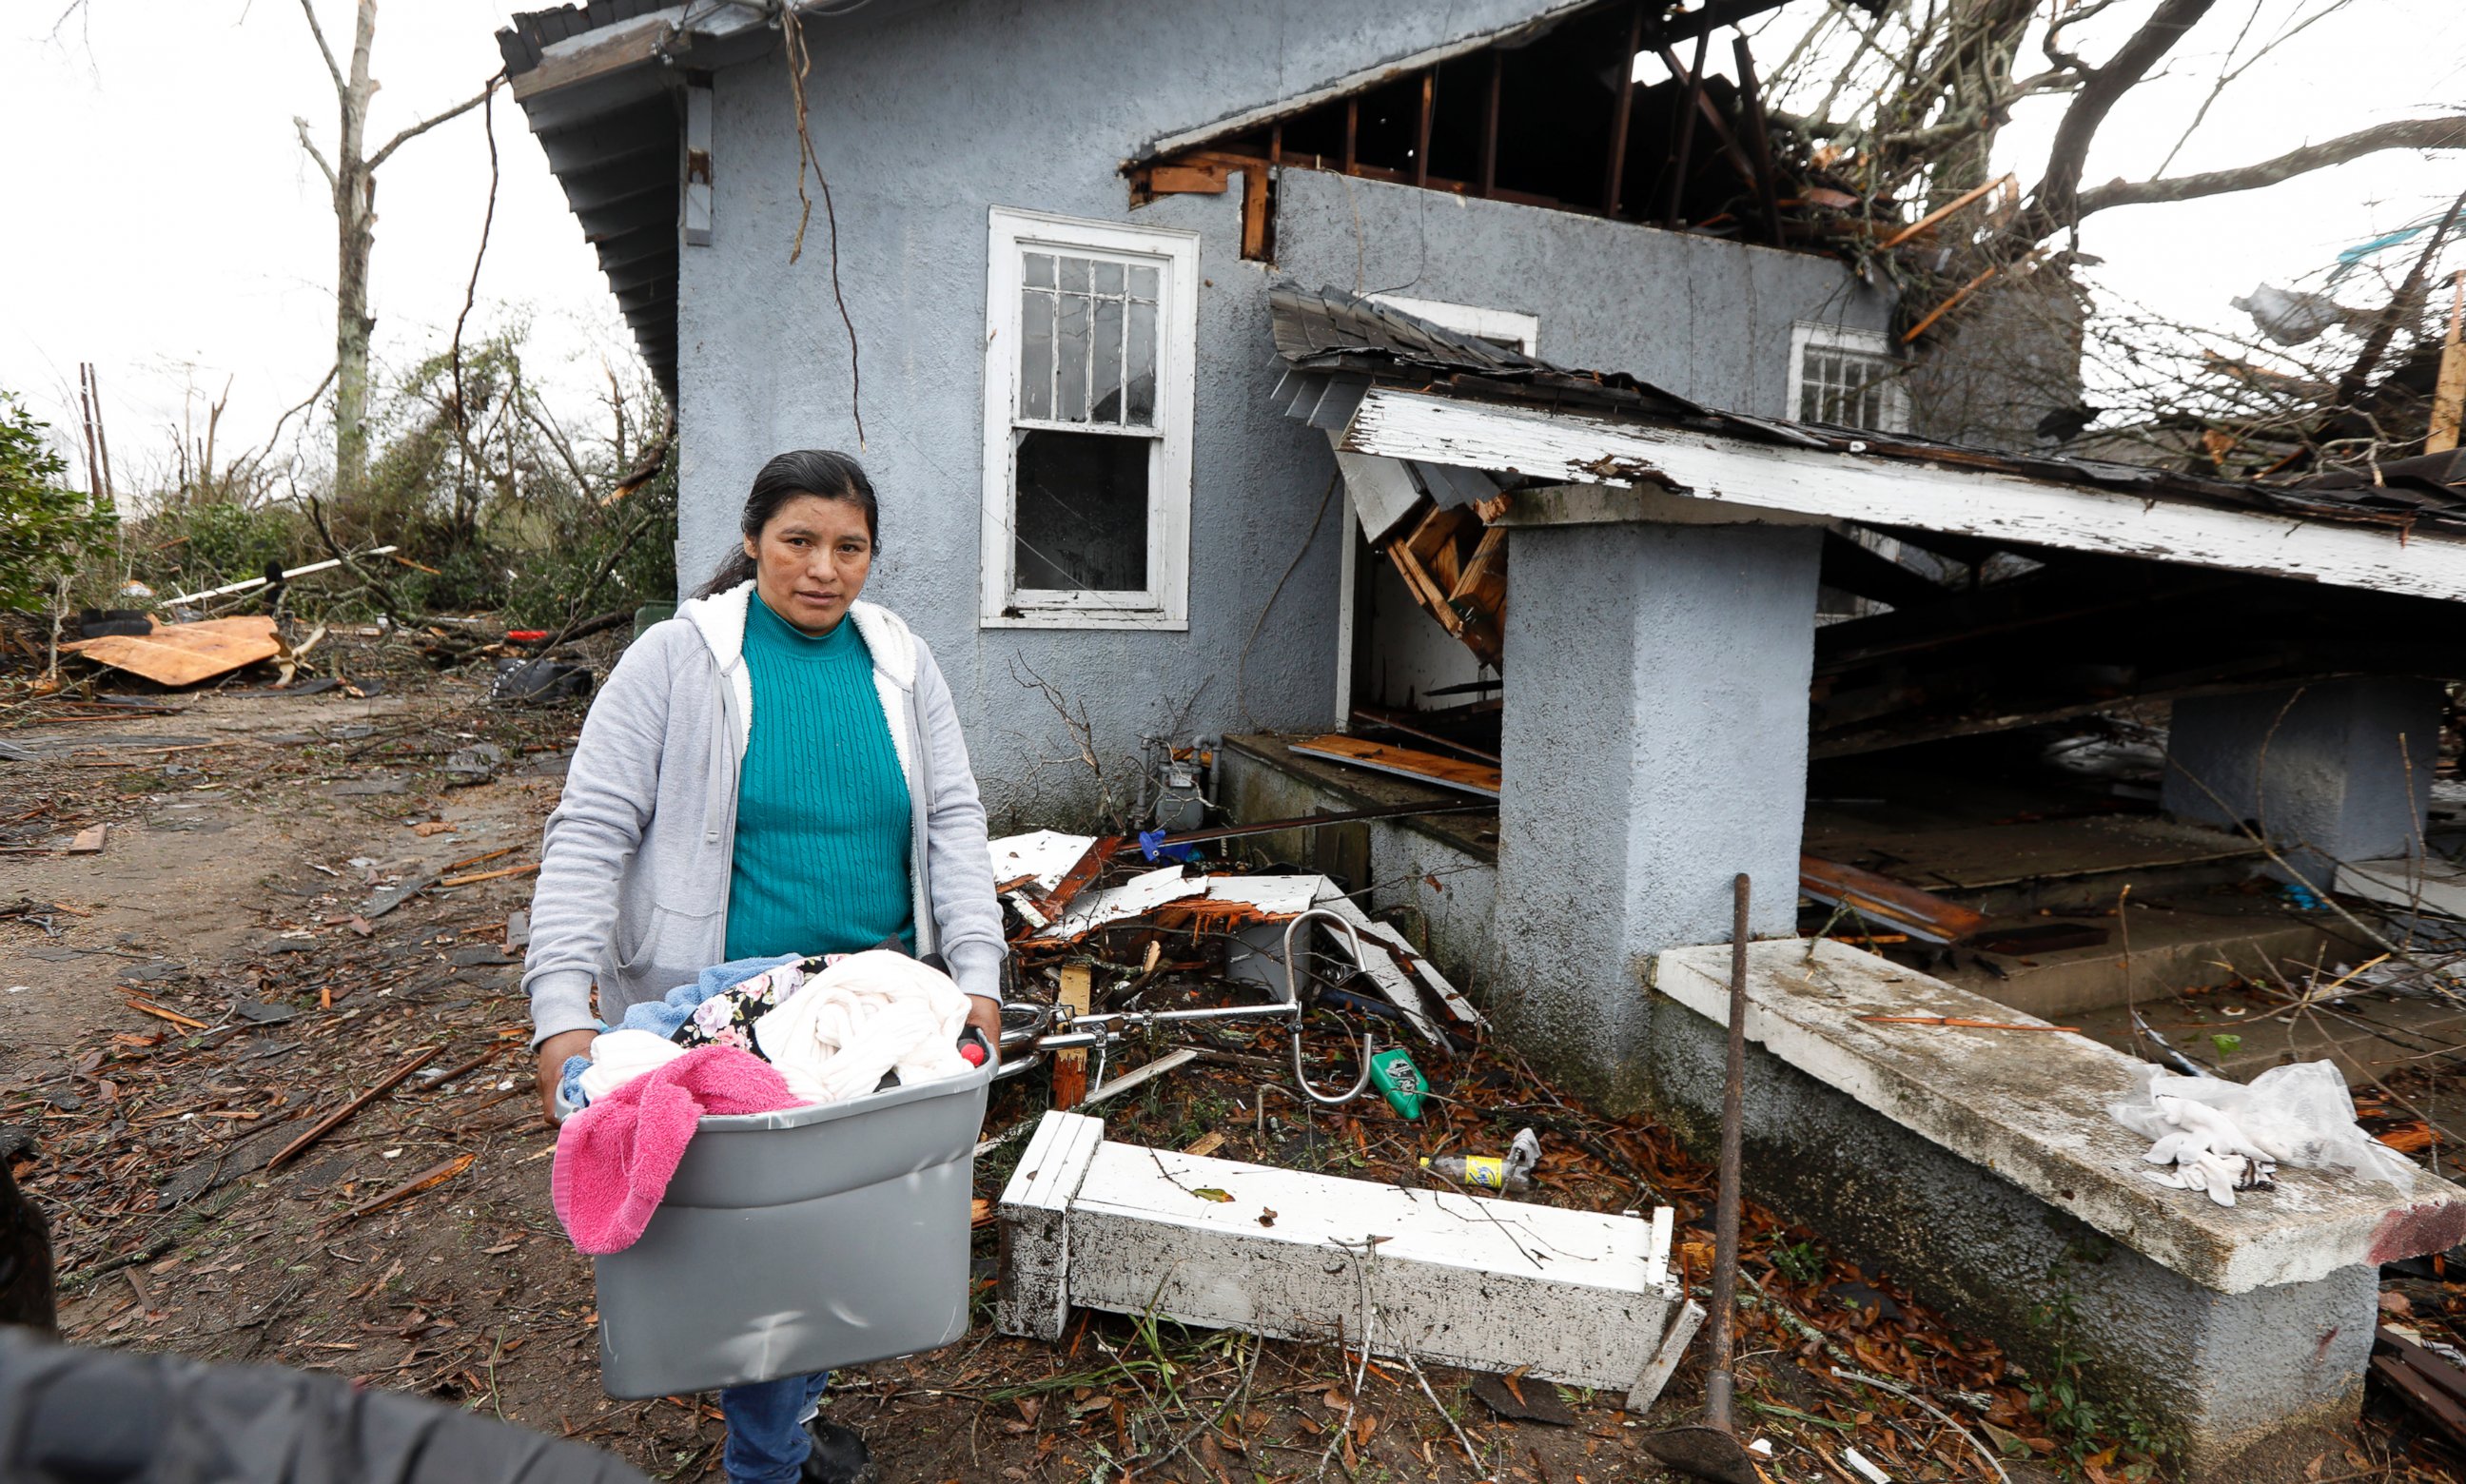 PHOTO: Margarita Morales carries her possessions out of a house she shared with two other people after a tornado destroyed the residence, Jan. 21, 2017 in Hattiesburg, Mississippi.